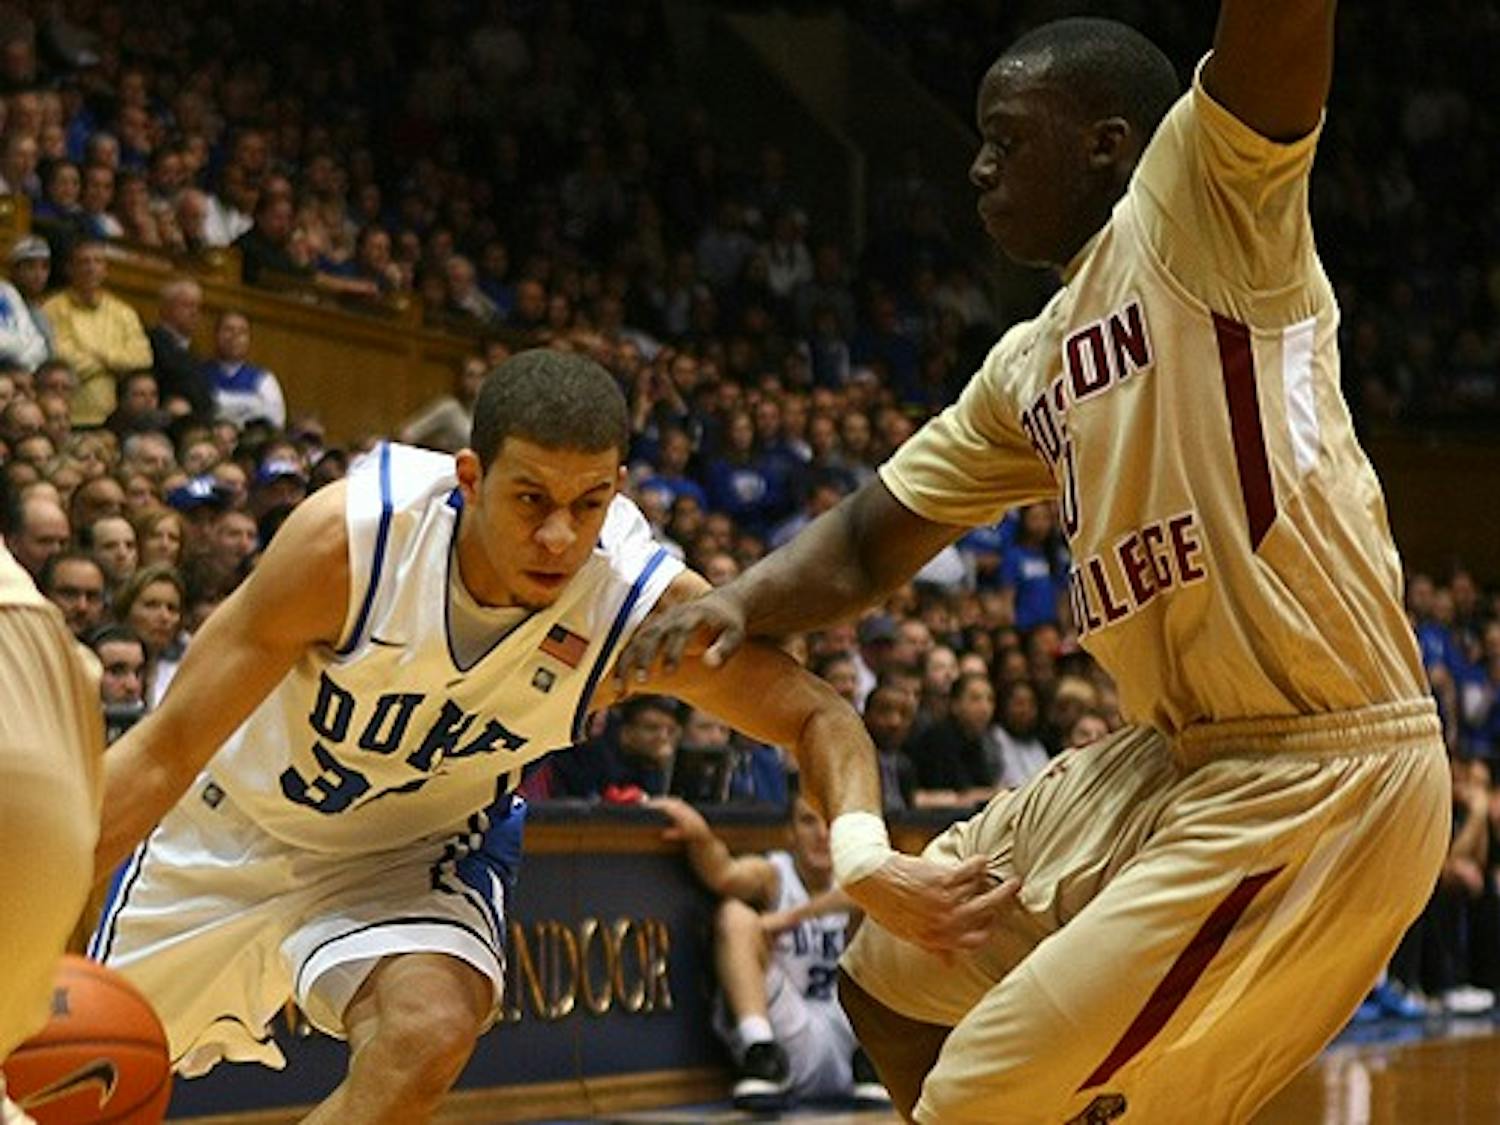 Redshirt sophomore Seth Curry scored his career-high in a Duke uniform against Boston College, racking up 20 points on 6-for-9 shooting.